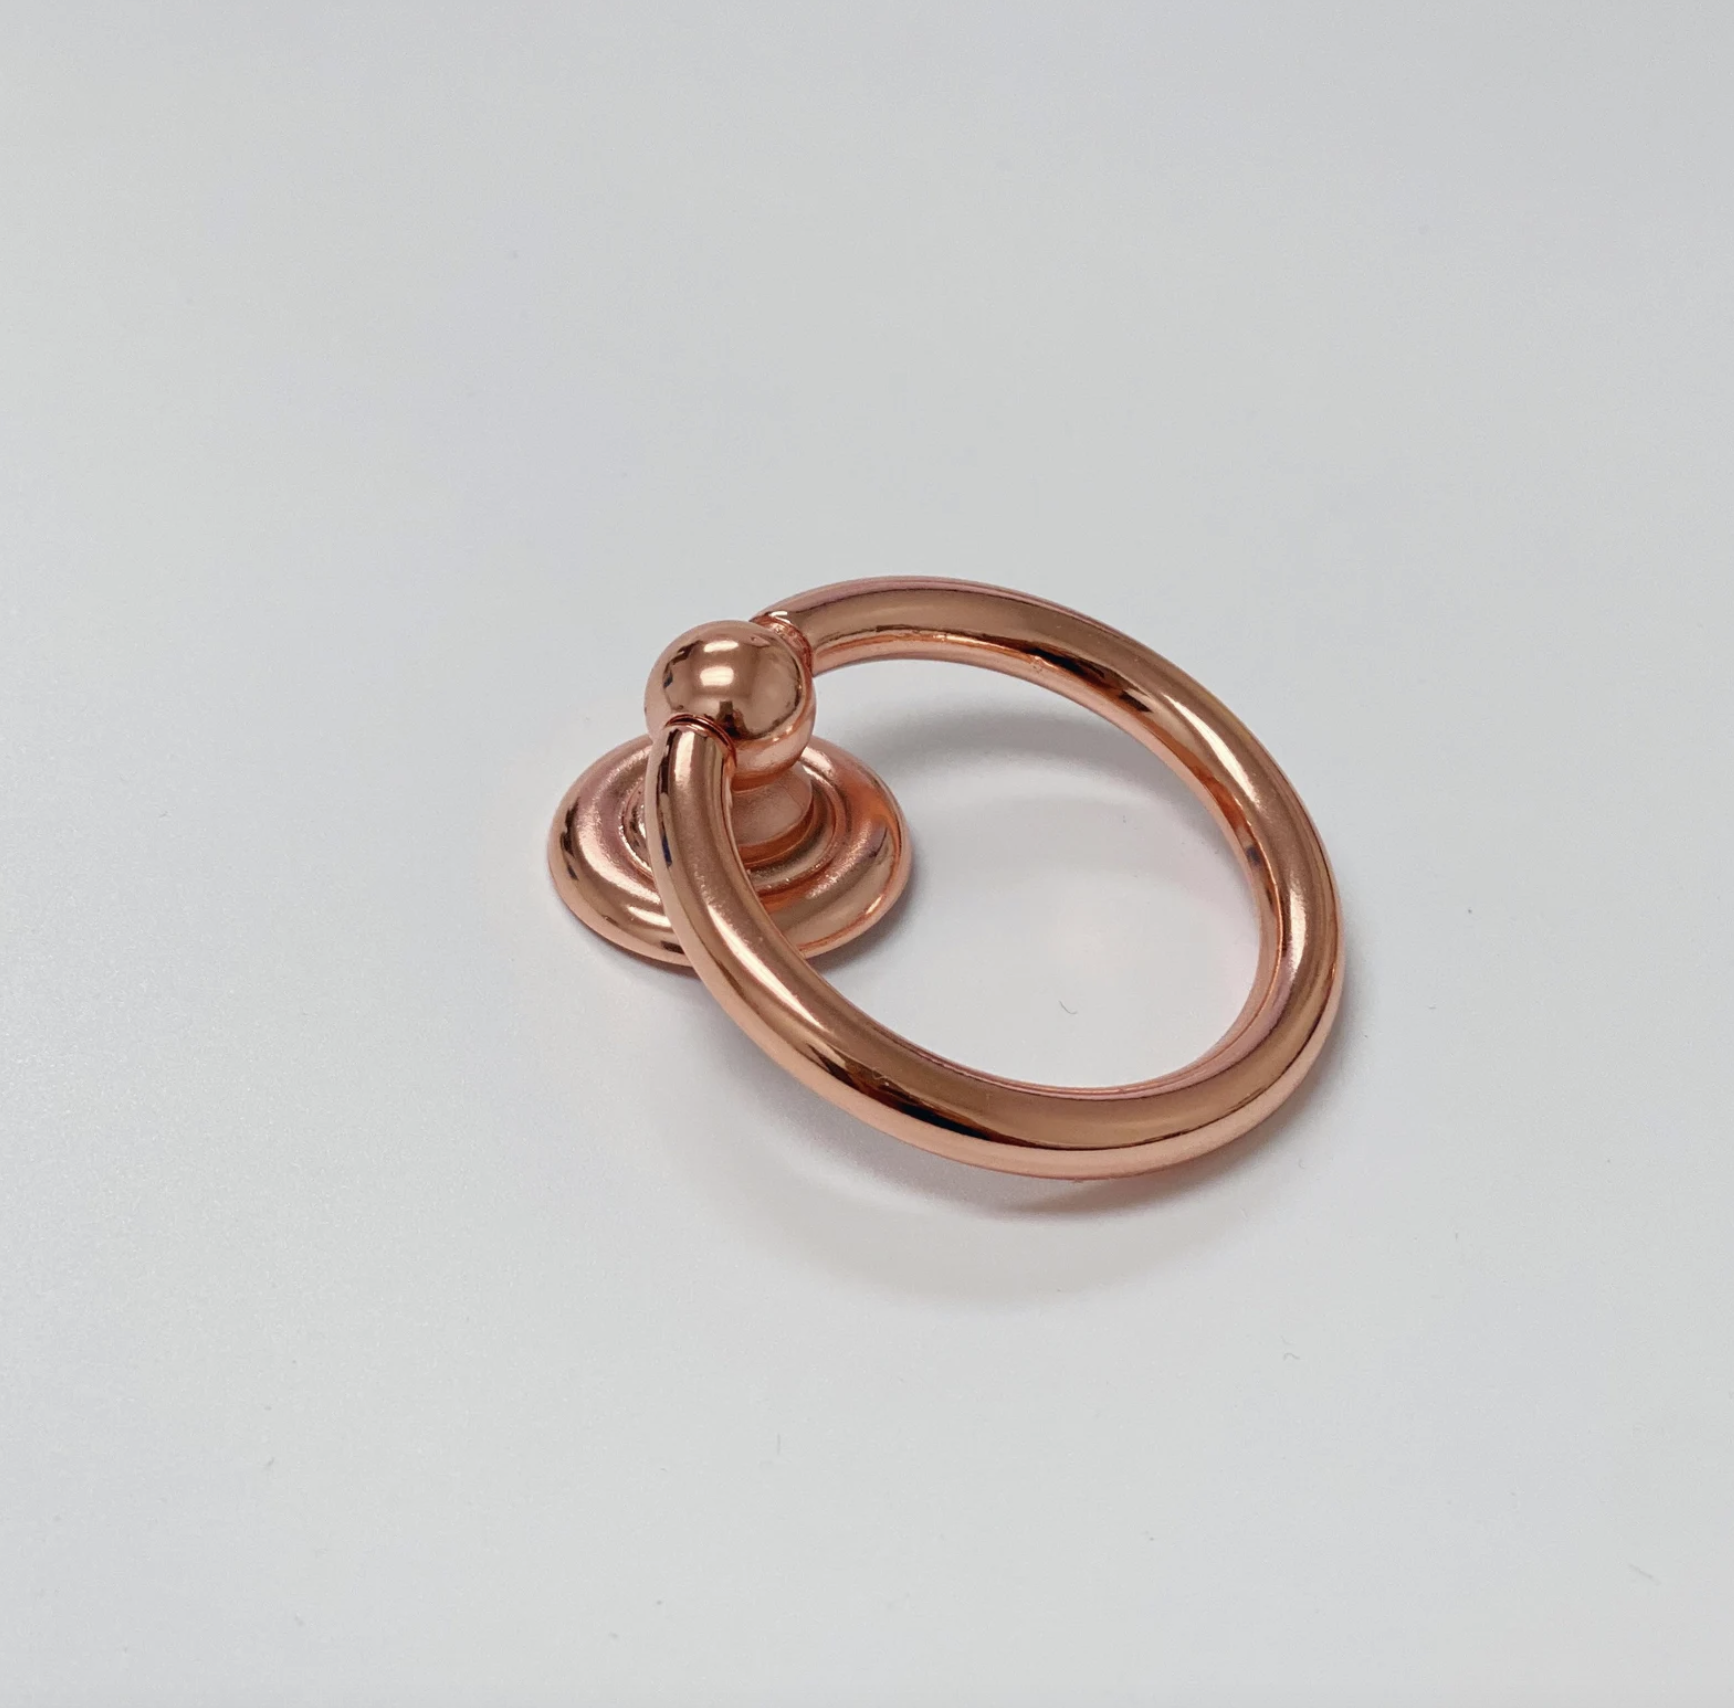 Polished Copper "Capri" Cup Drawer Pull, Ring Pull or Round Cabinet Knob | Pulls